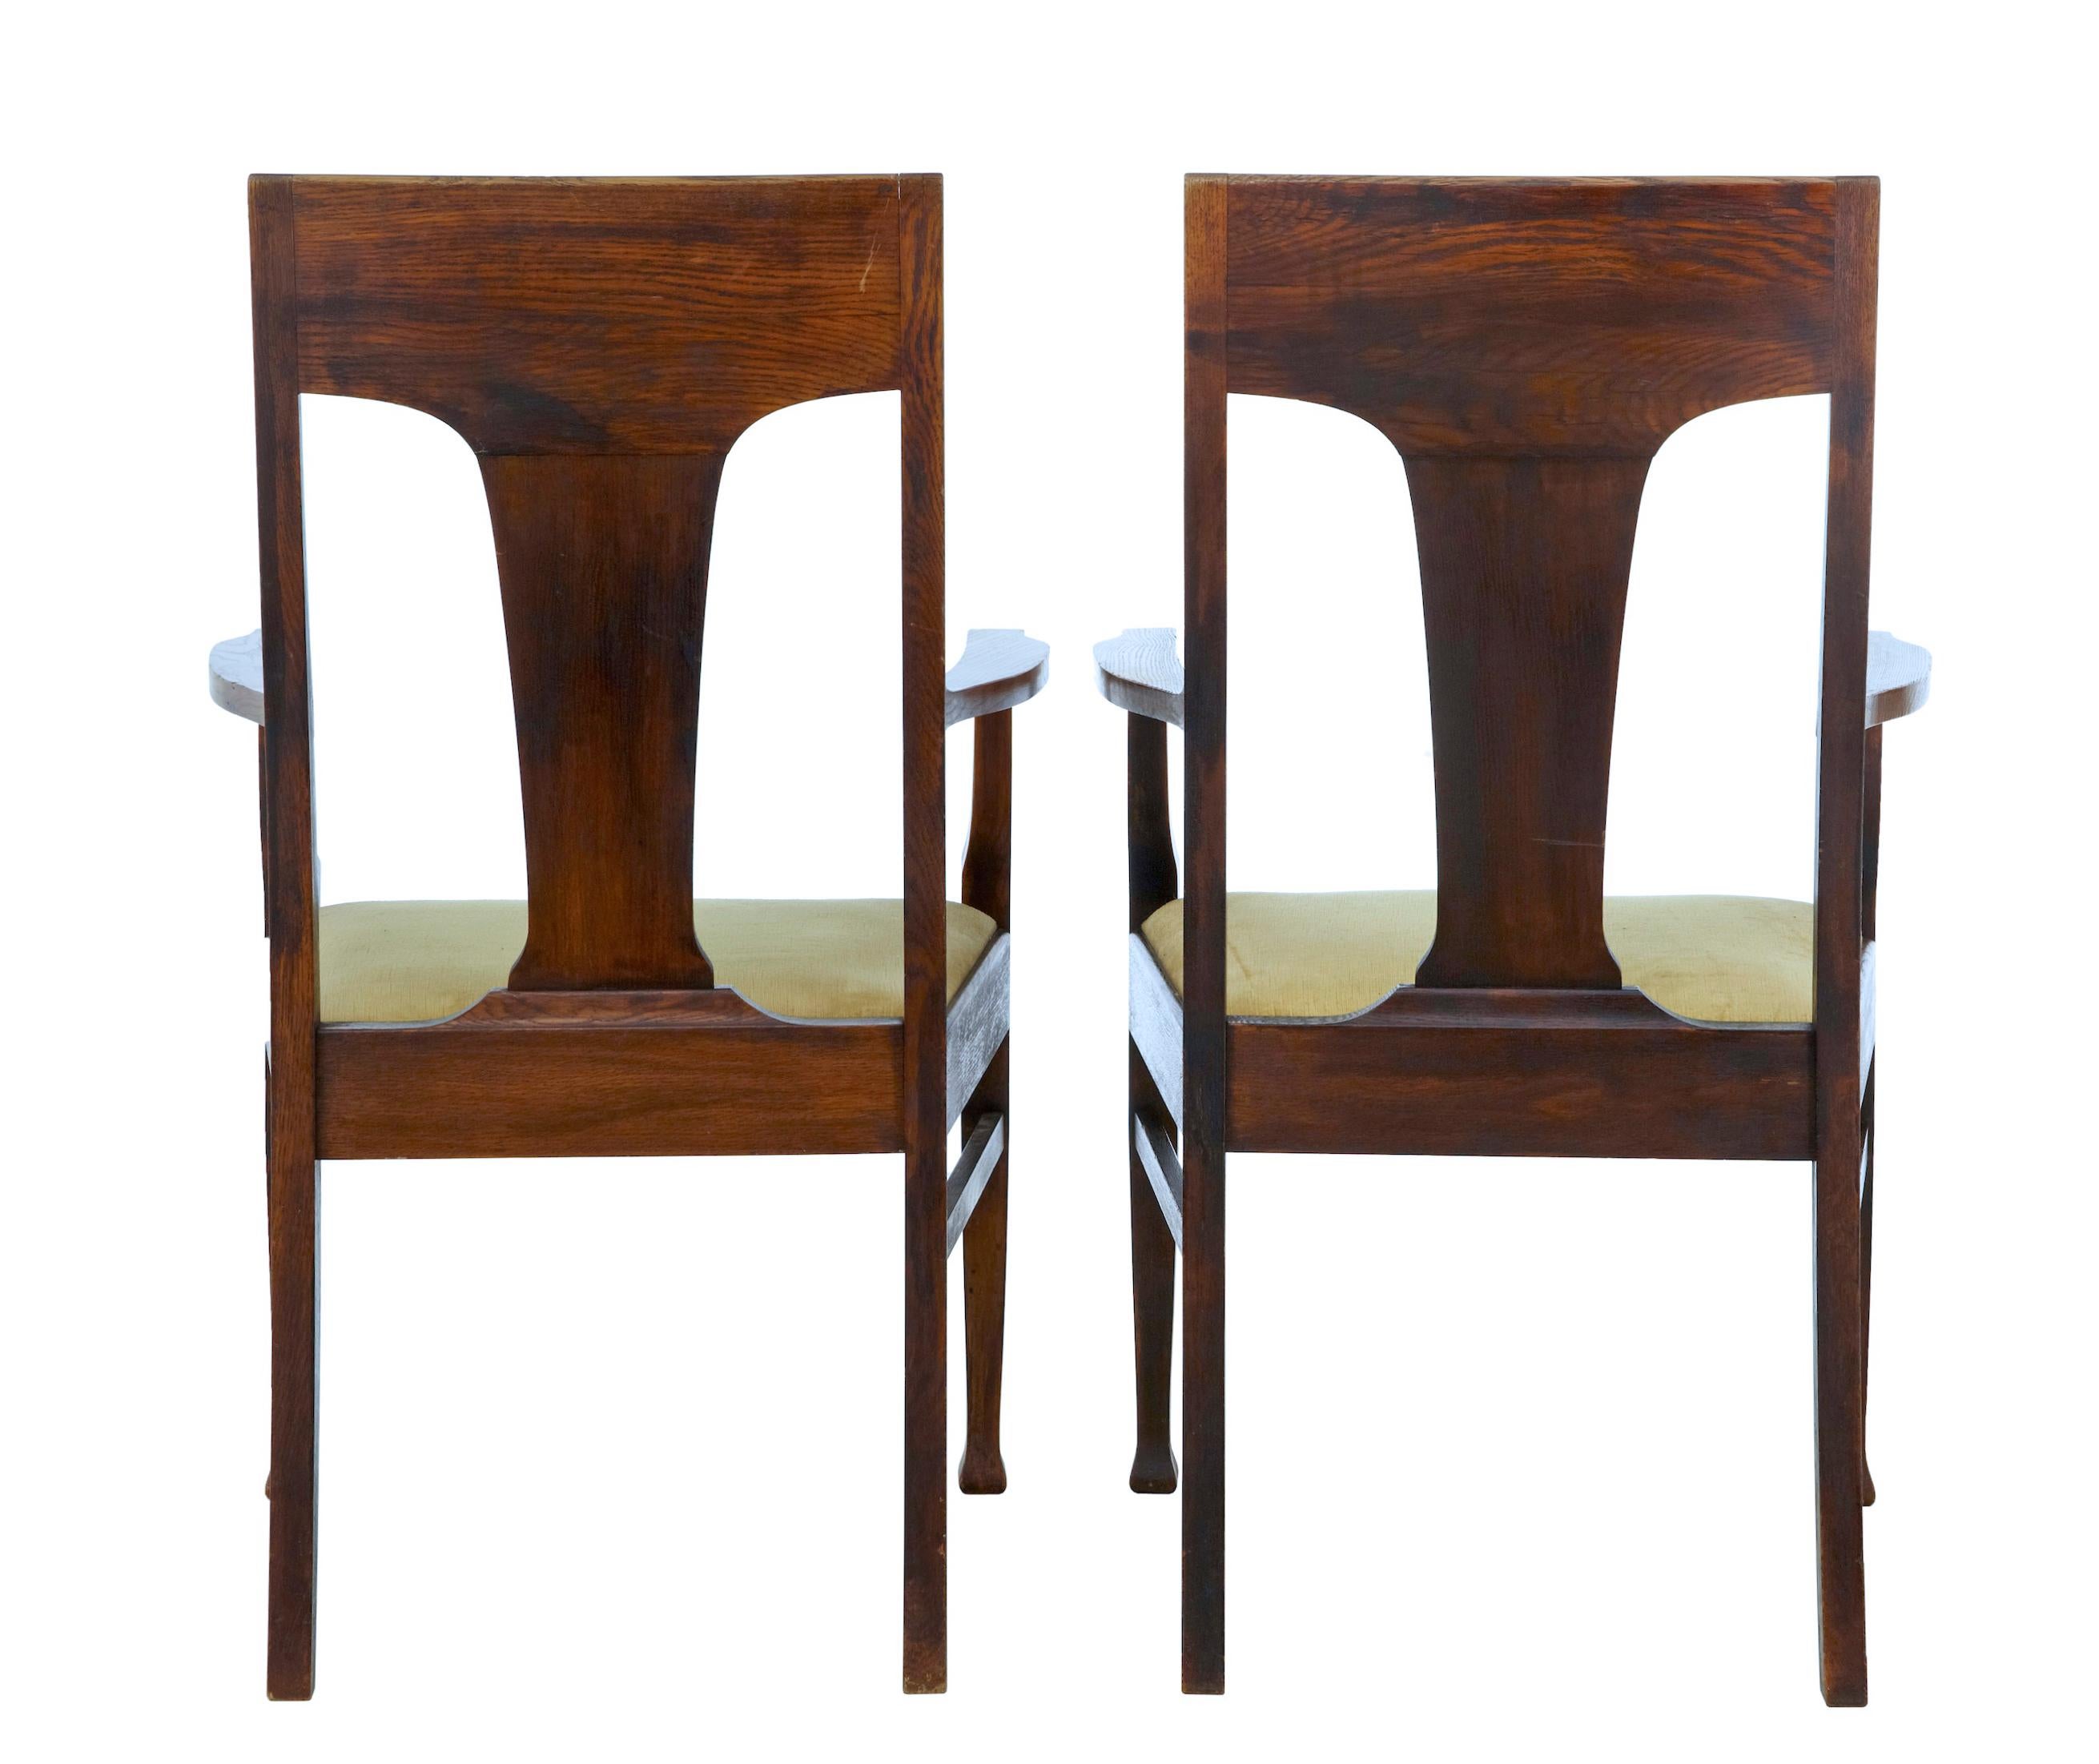 Pair of late 19th century oak Arts & Crafts armchairs, circa 1890.

Fine example of the arts and crafts movement. Made from solid oak with shaped backs featuring a carved leaf and berry design in the back rest. Shaped arms, supported by tapering